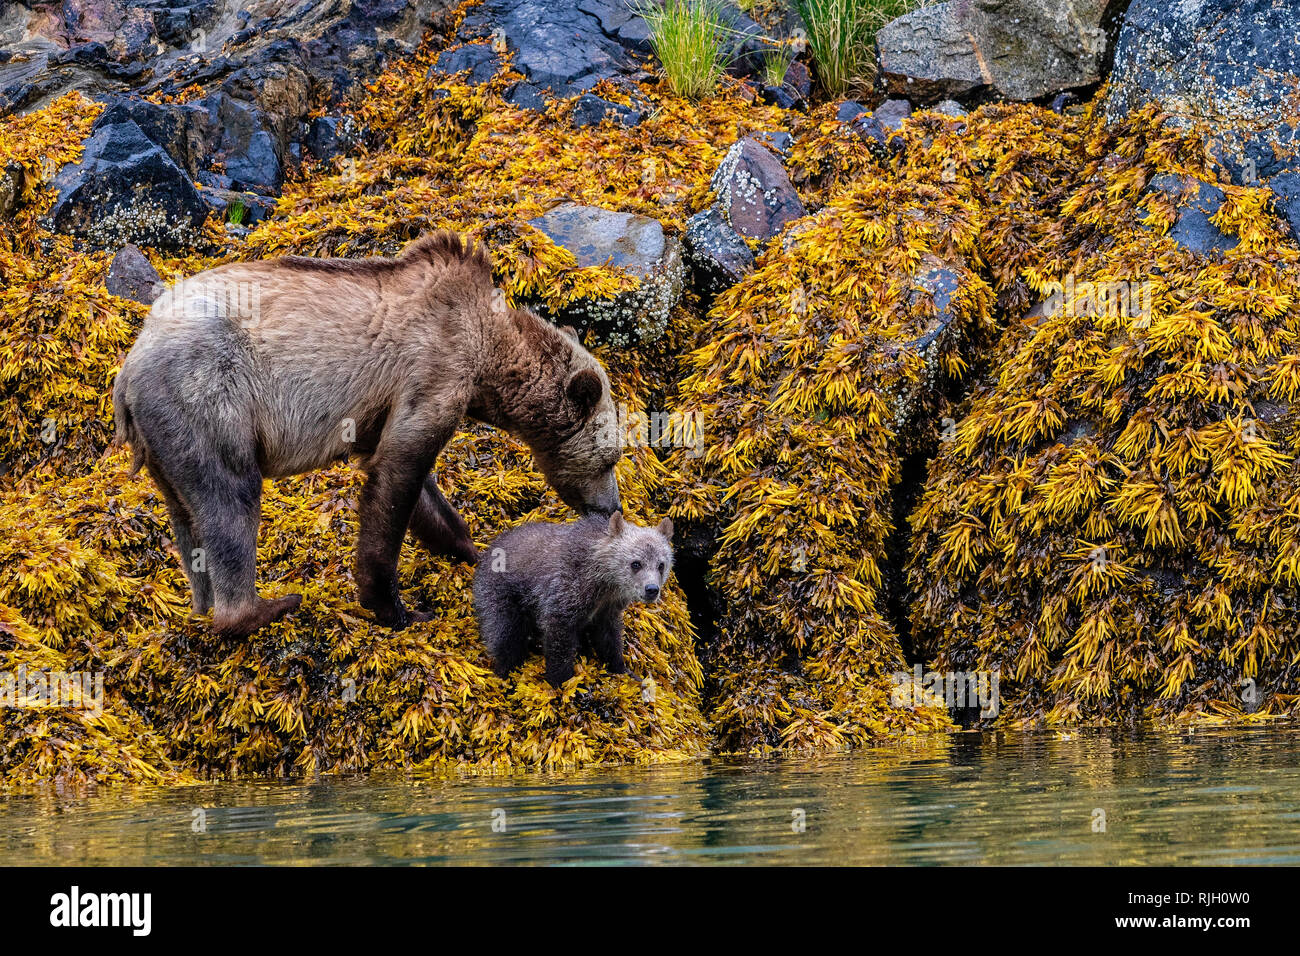 Grizzly bear Mom and her cub feeding on seaweed during low tide along the Great Bear Rainforest shoreline, First Nations Territory, British Columbia,  Stock Photo